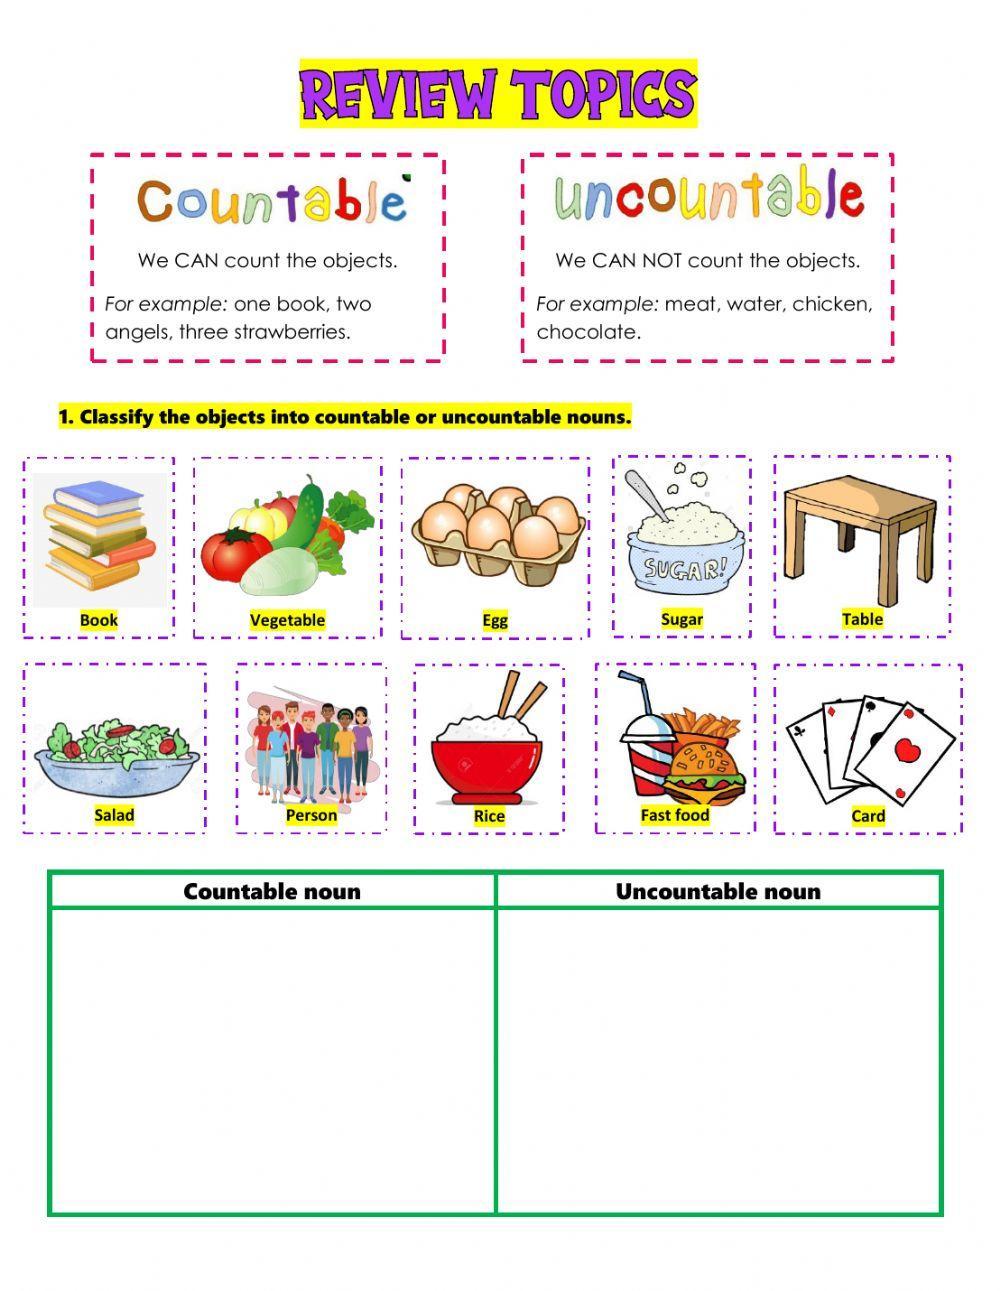 Countables, Uncountables and More Vocabulary